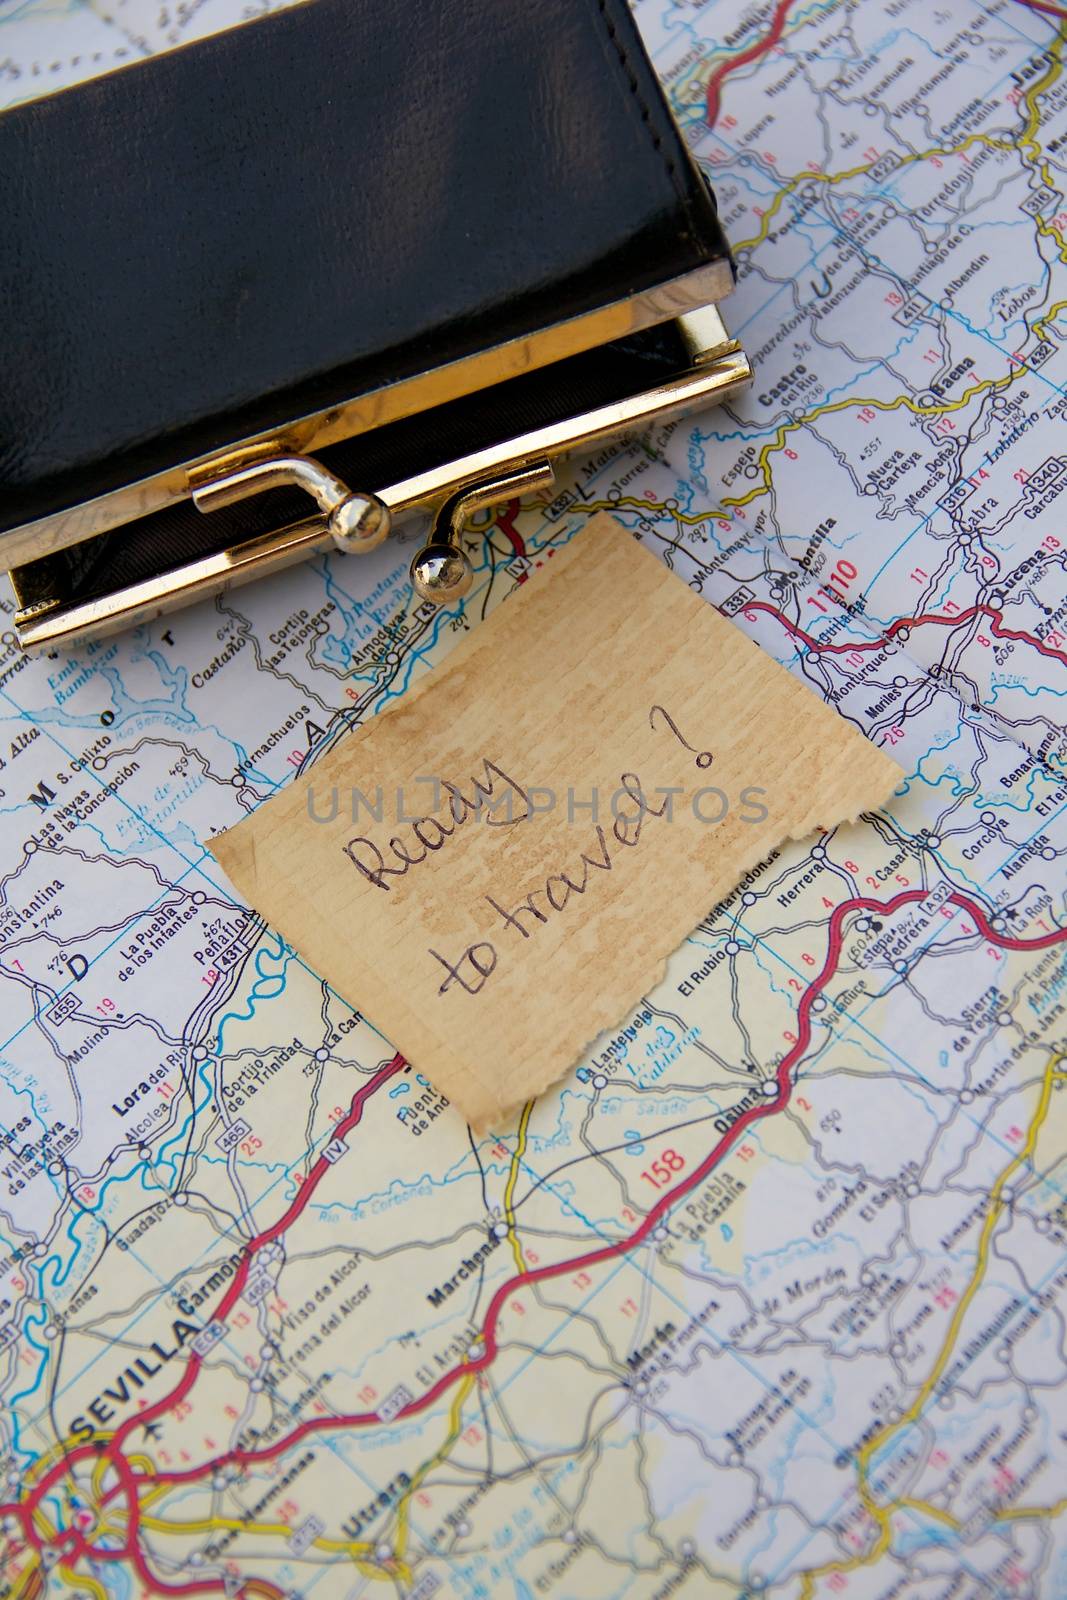 Message left on the road map close to the small opened and empty wallet:"Ready to travel?" 